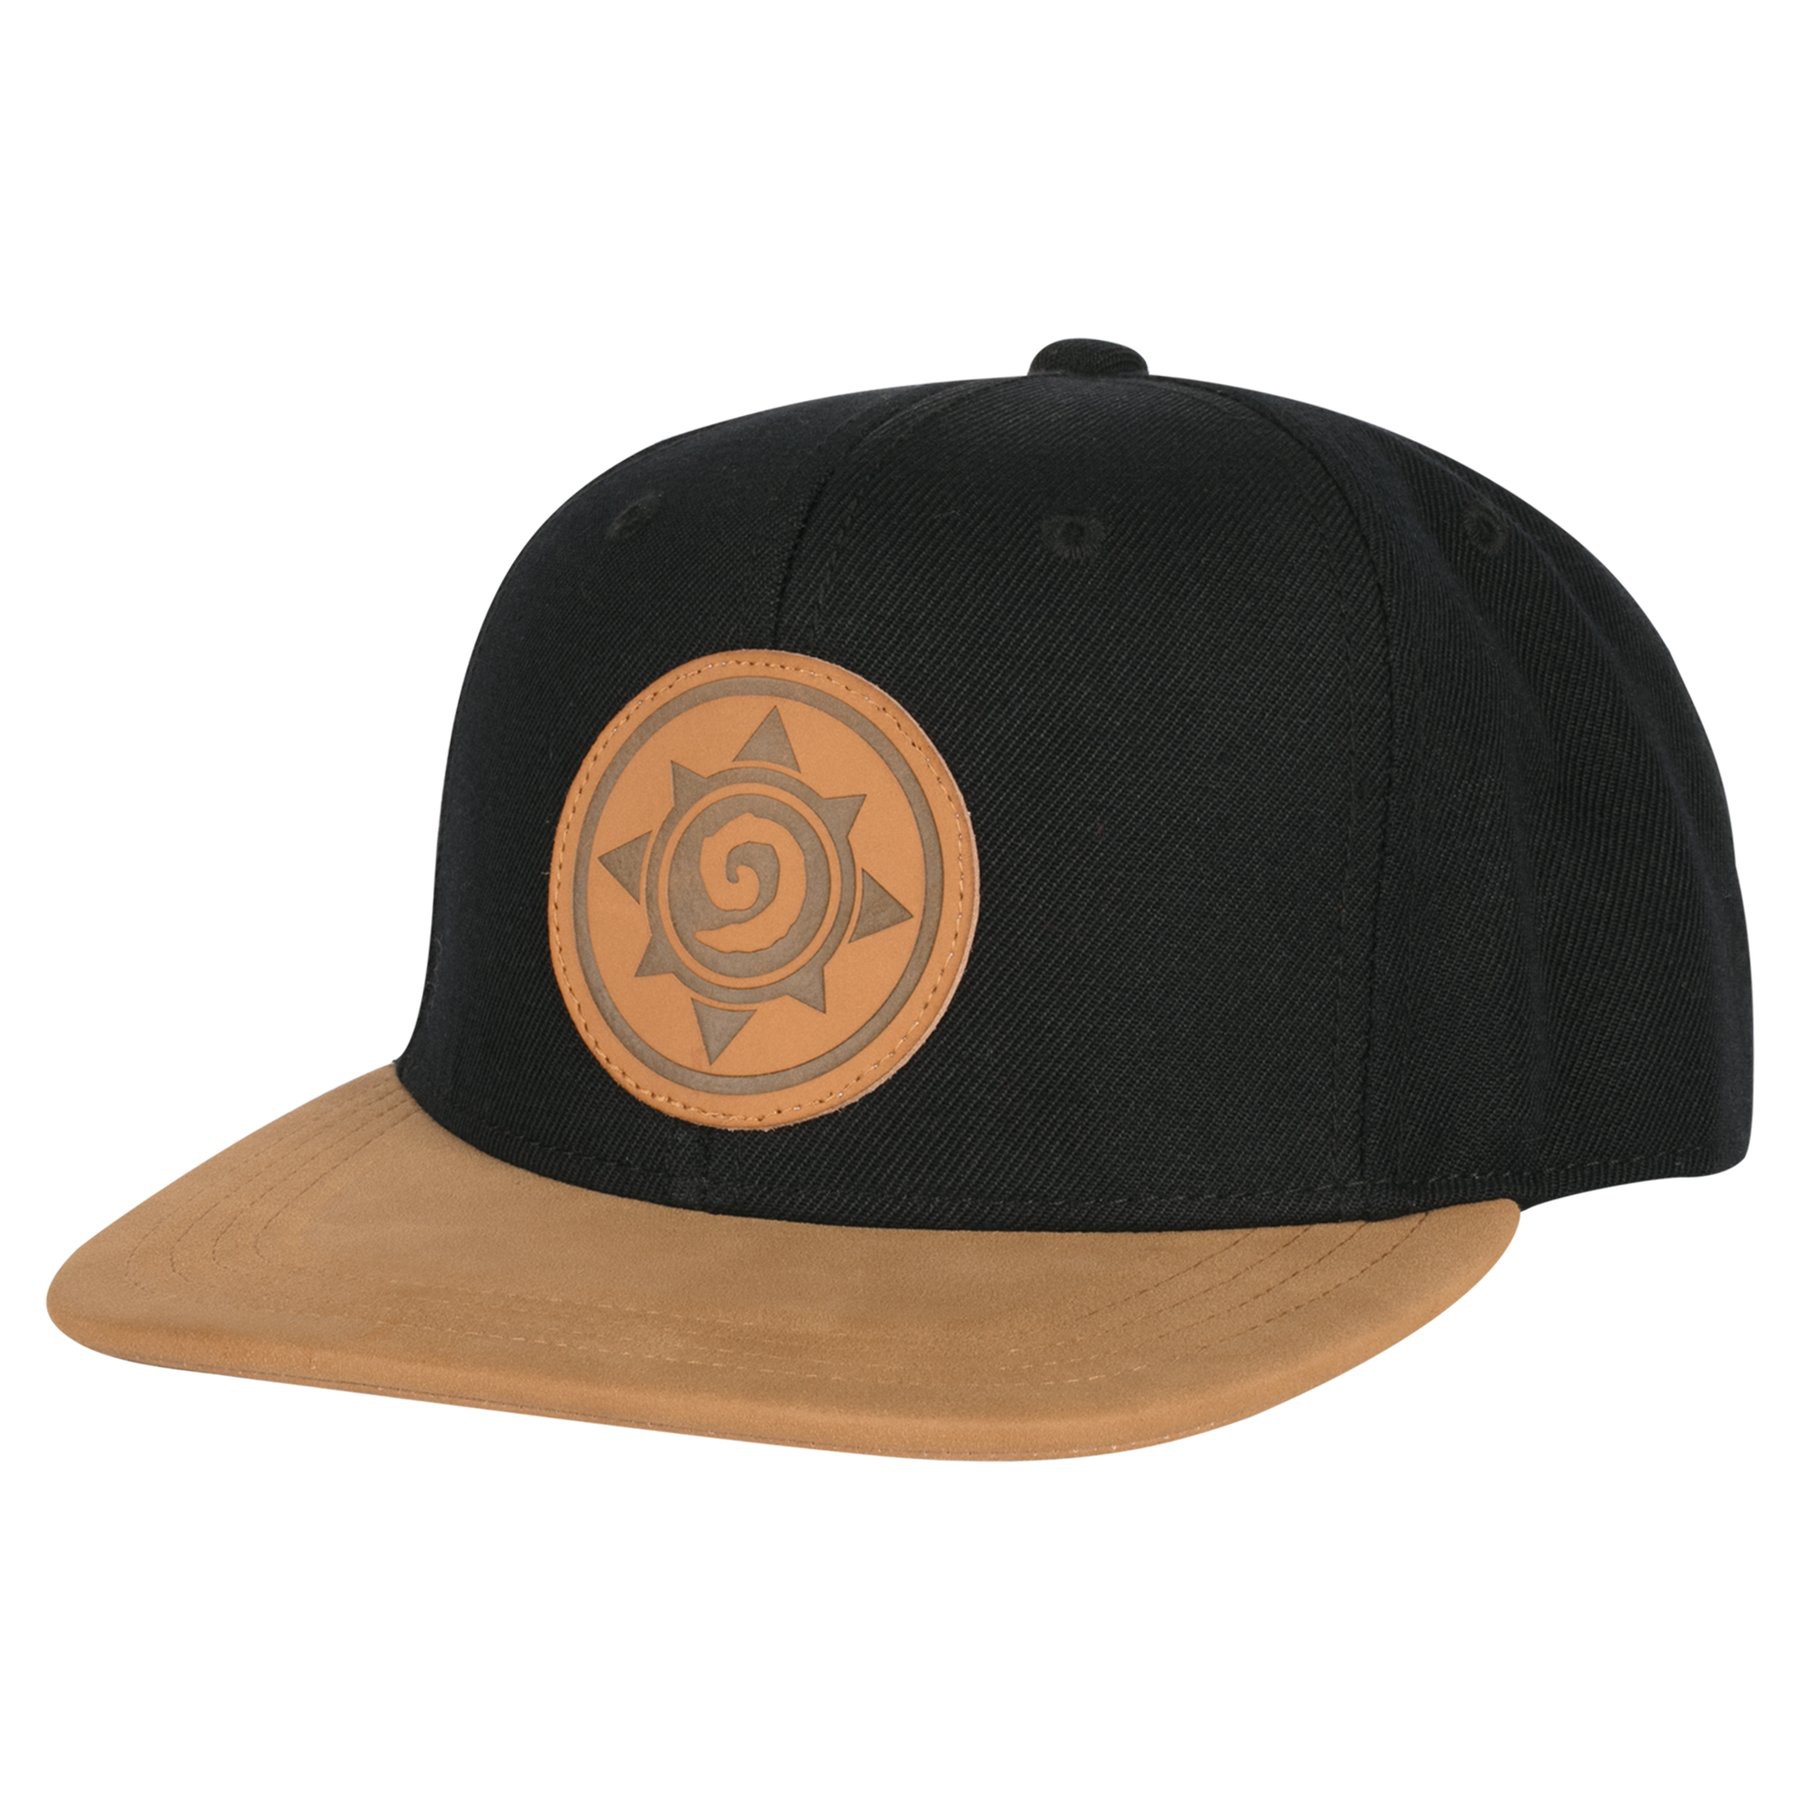 HEARTHSTONE TWO TONE ROSE SNAP BACK HAT